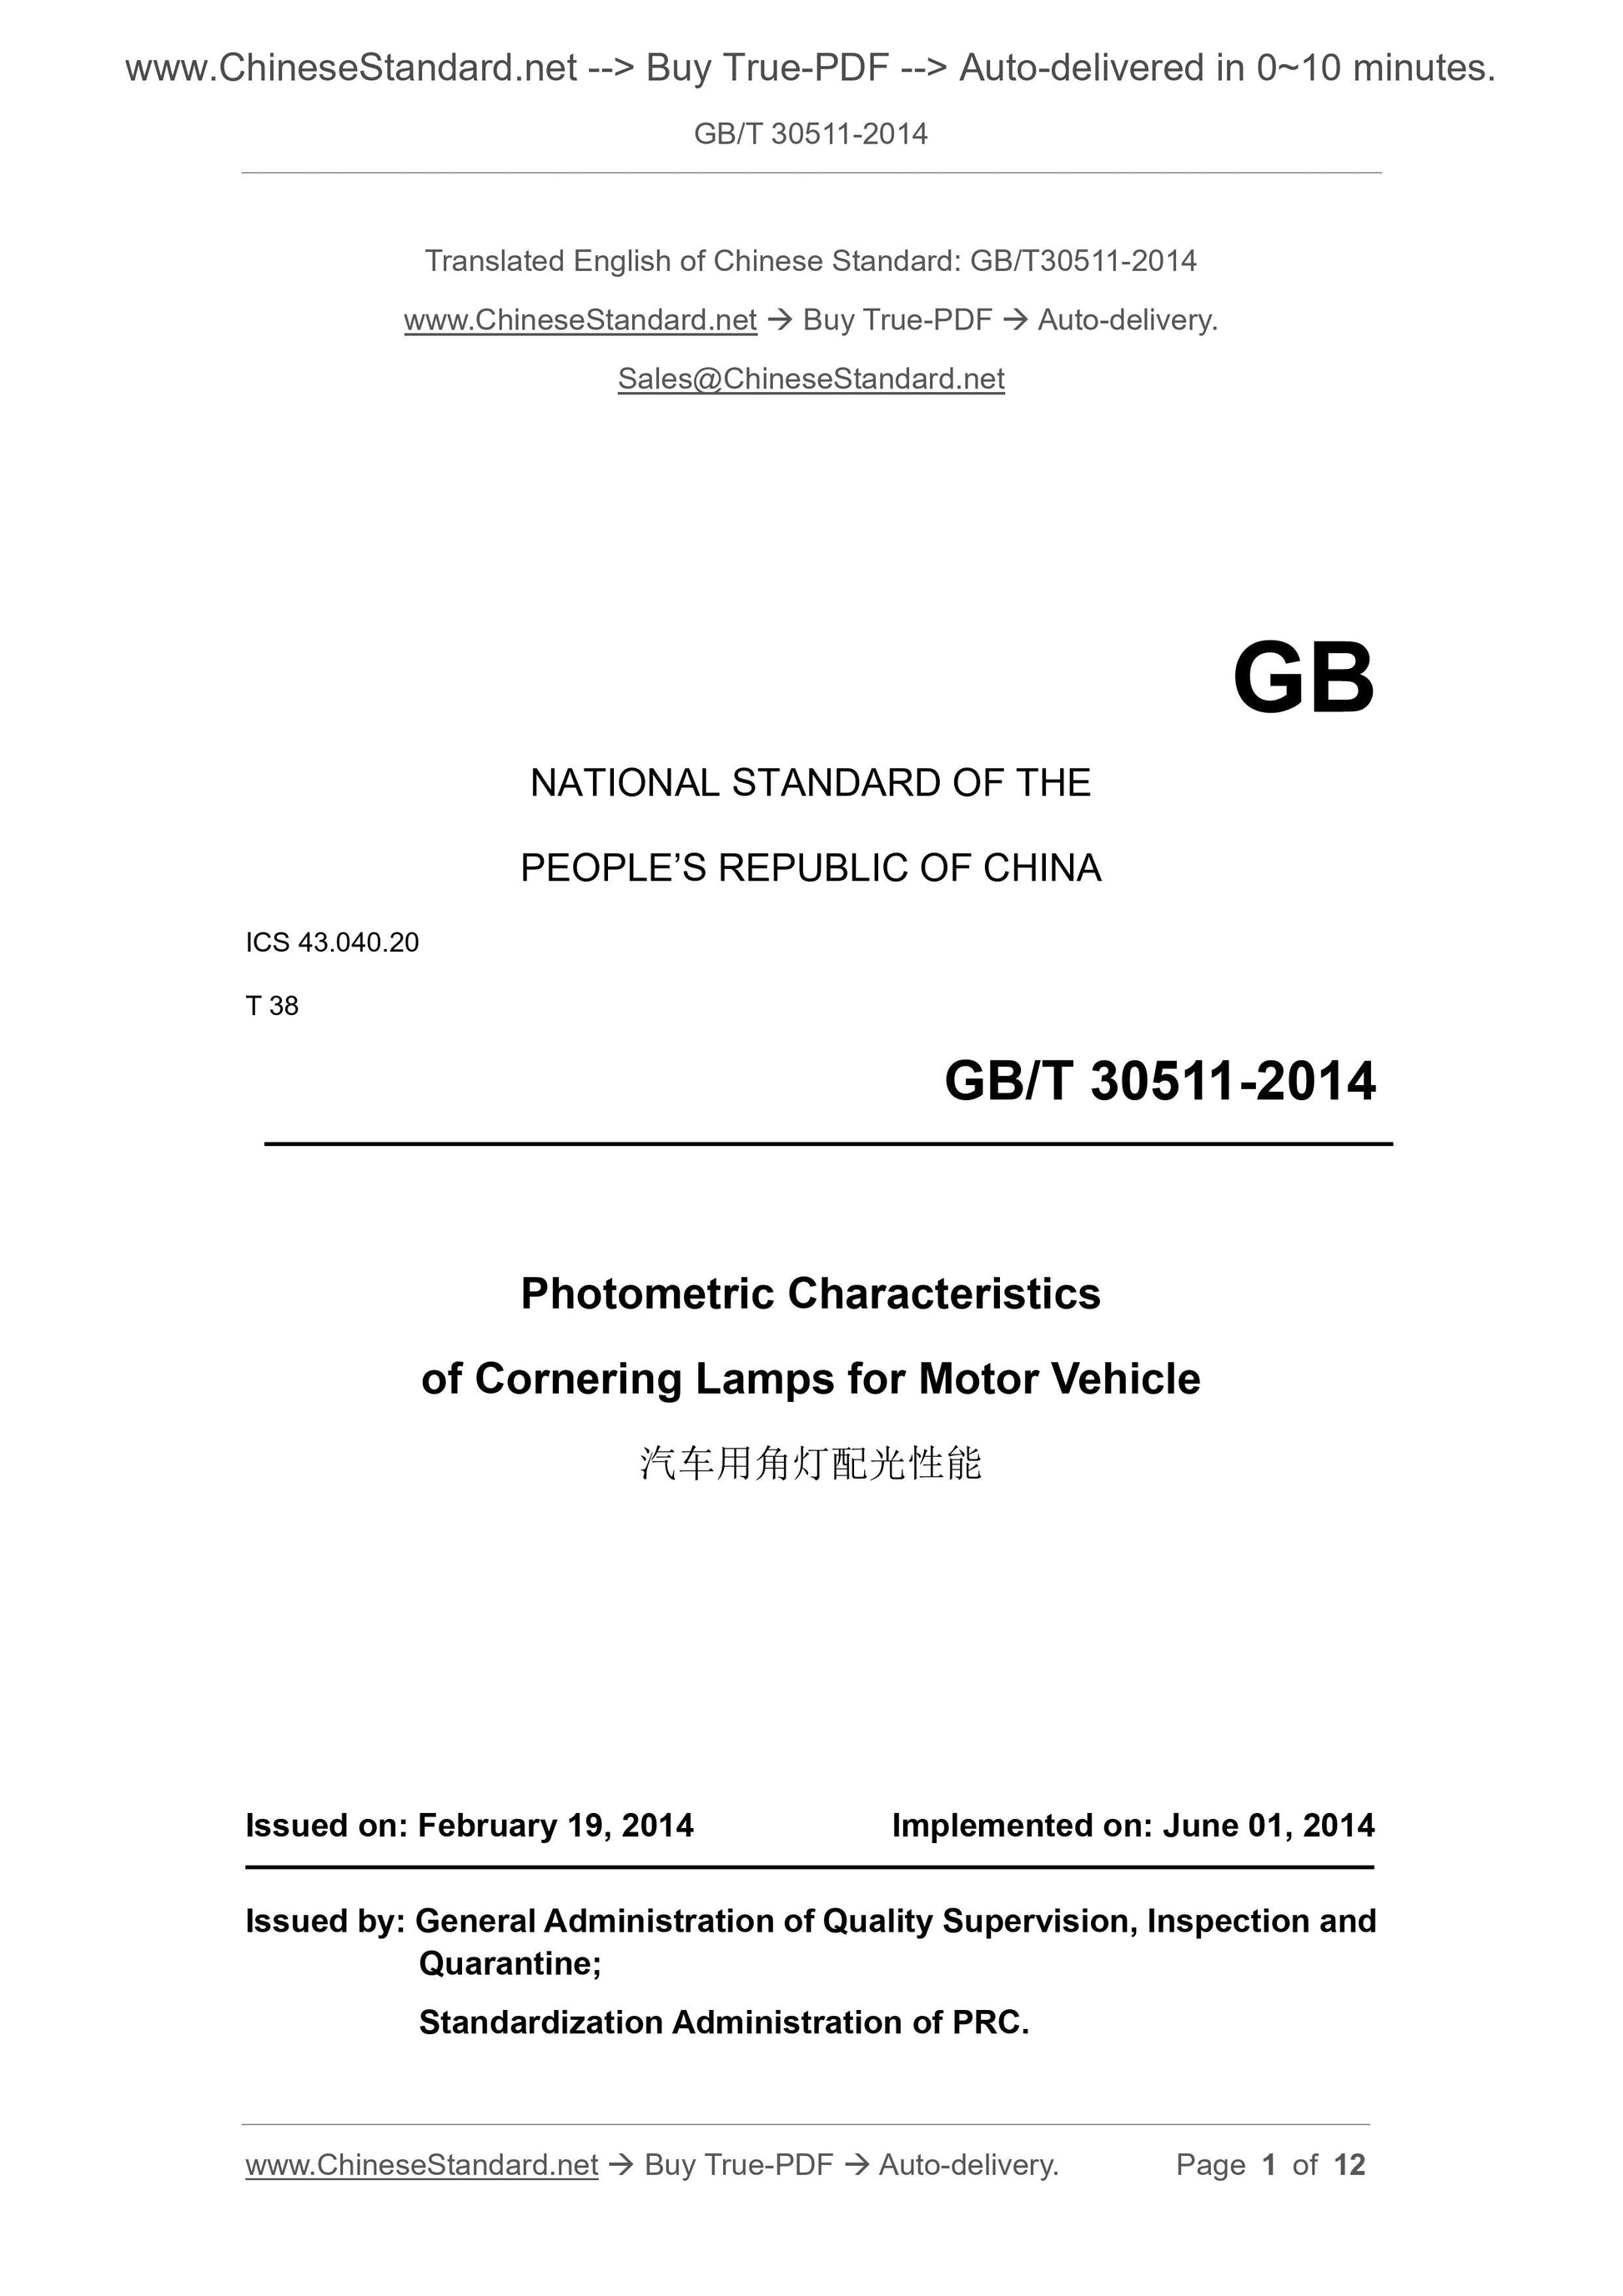 GB/T 30511-2014 Page 1